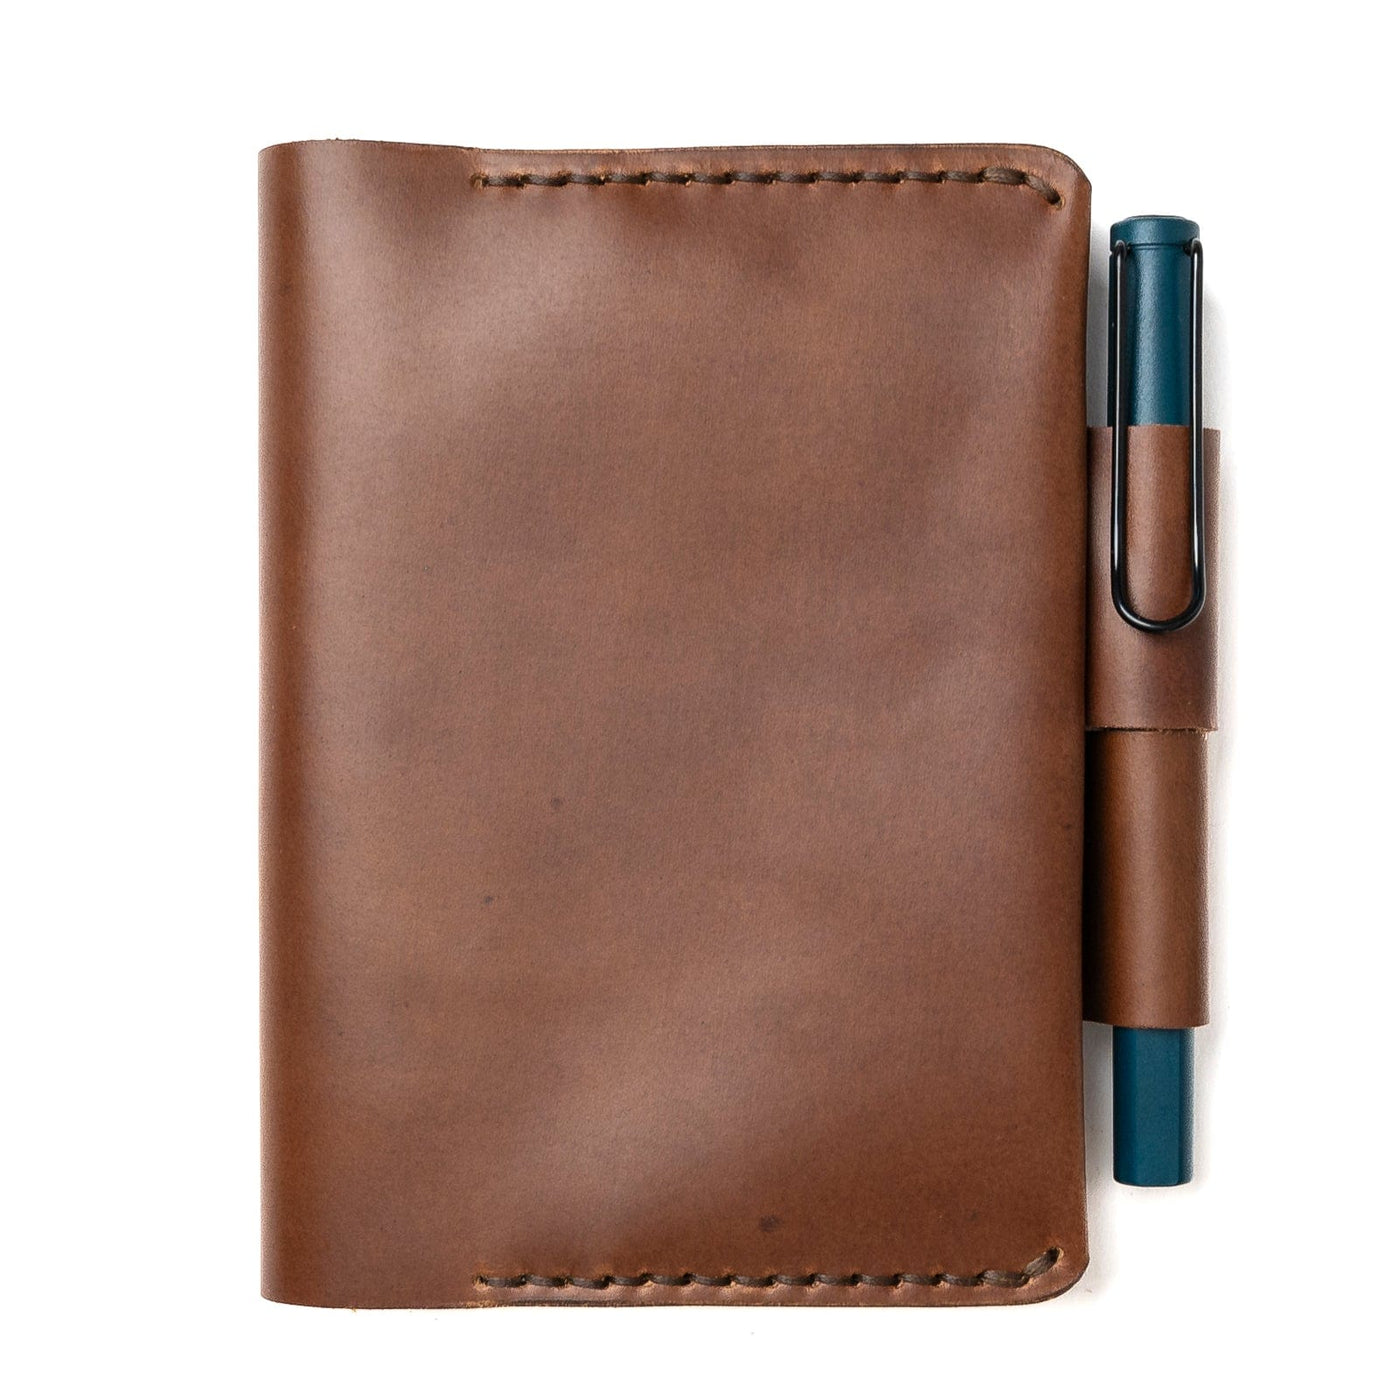 Leather A6 Notebook Cover - Natural Popov Leather